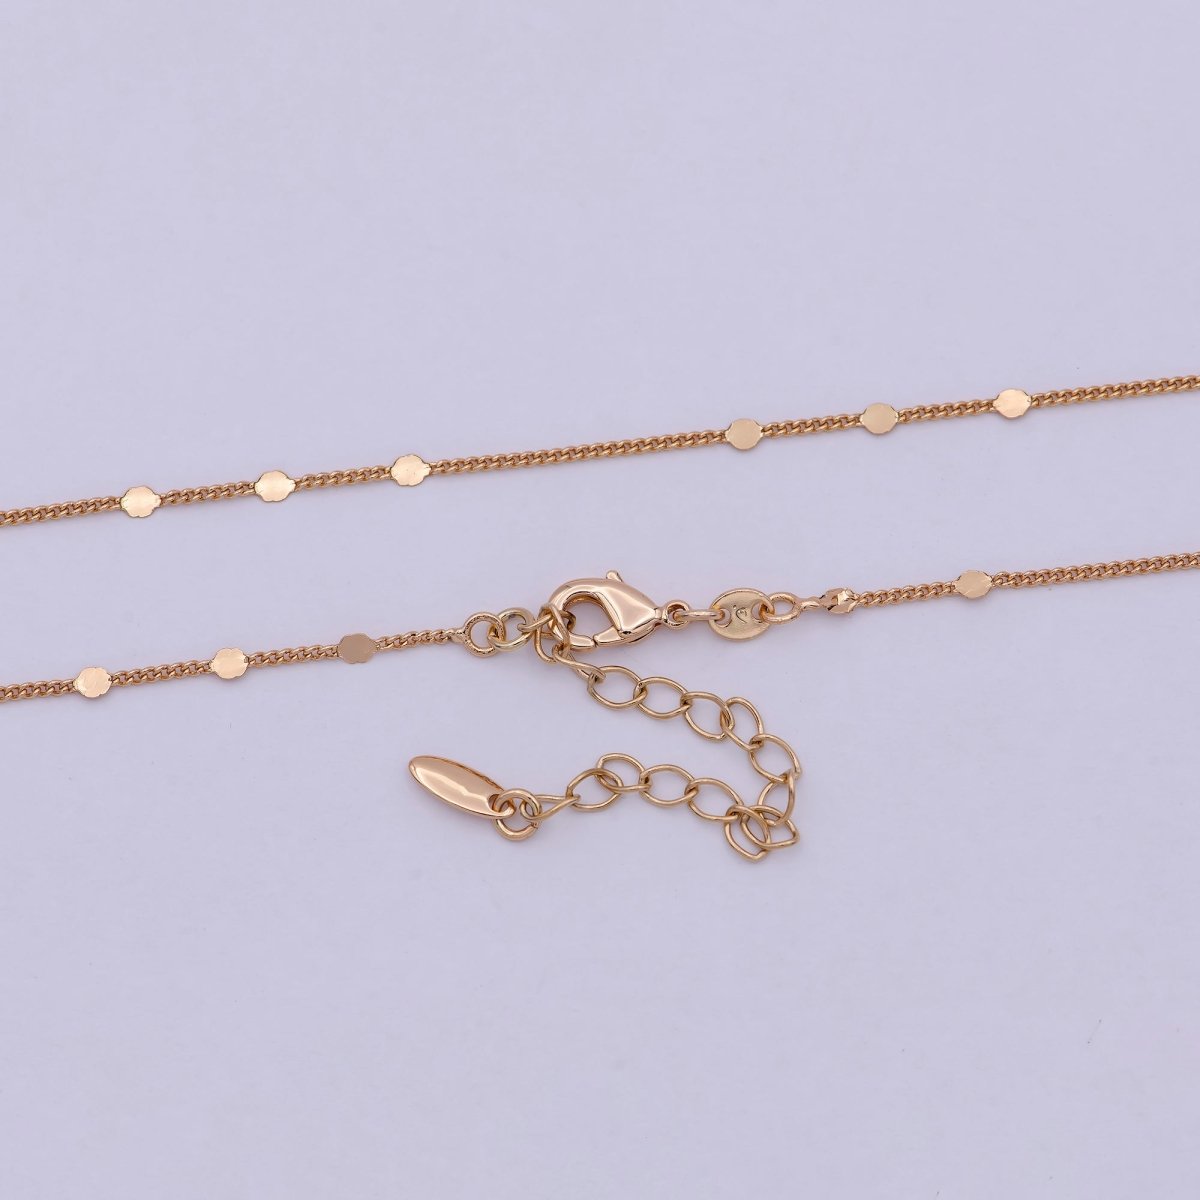 1mm 18K Gold Filled Chain Necklace Gold Curb Chain, Gold Chains 18 inch + 2 inch extender | WA-542 Clearance Pricing - DLUXCA